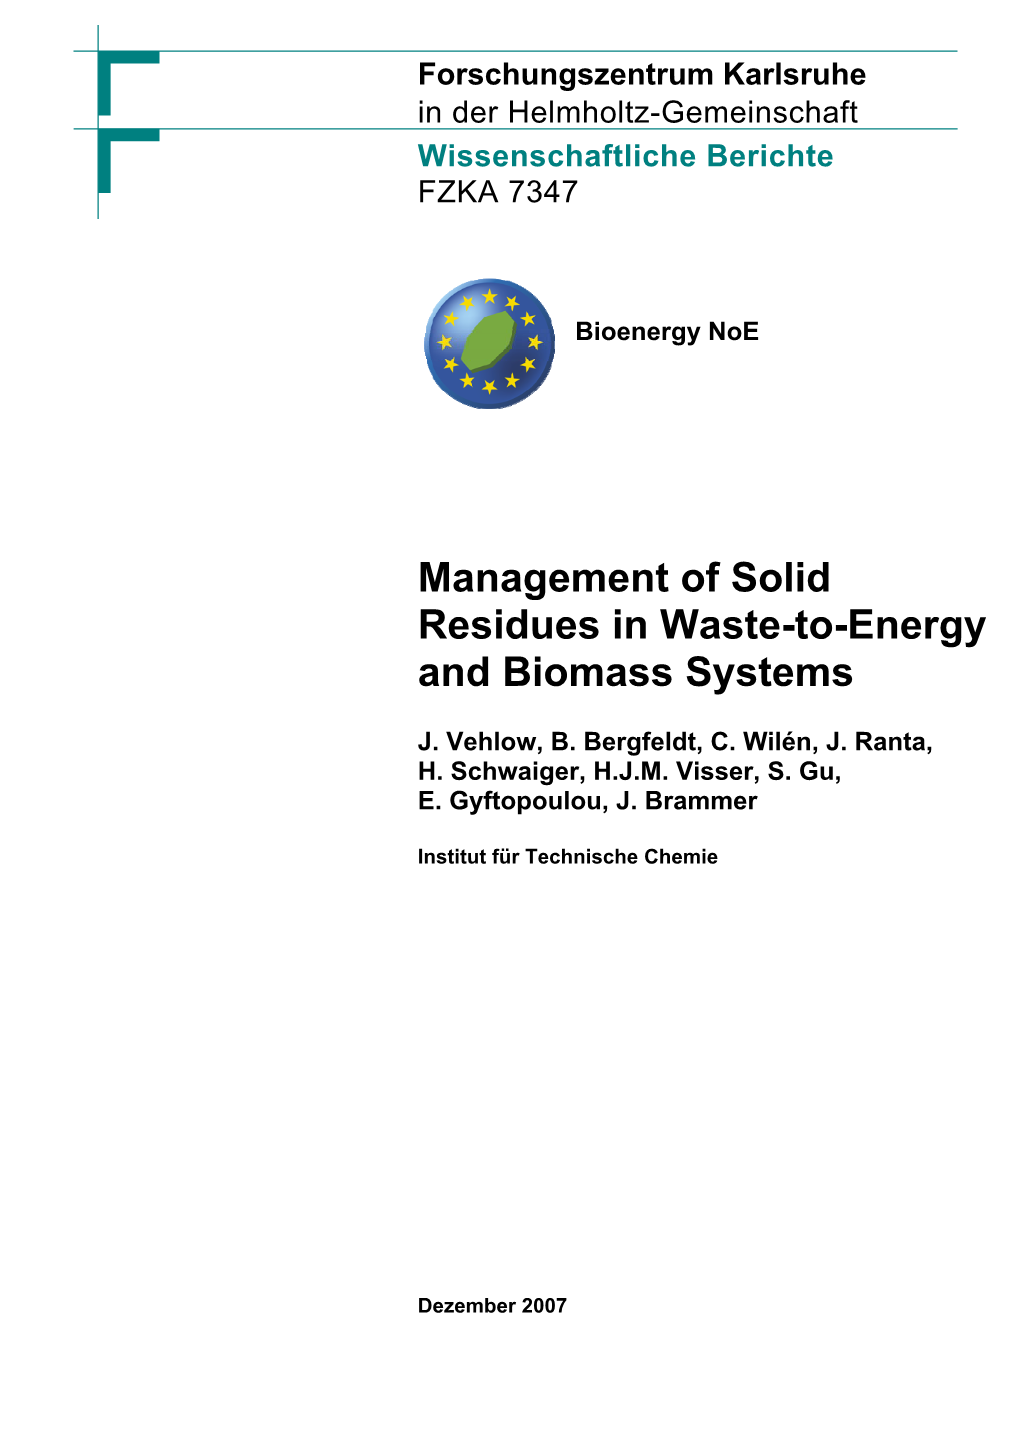 Management of Solid Residues in Waste-To-Energy and Biomass Systems